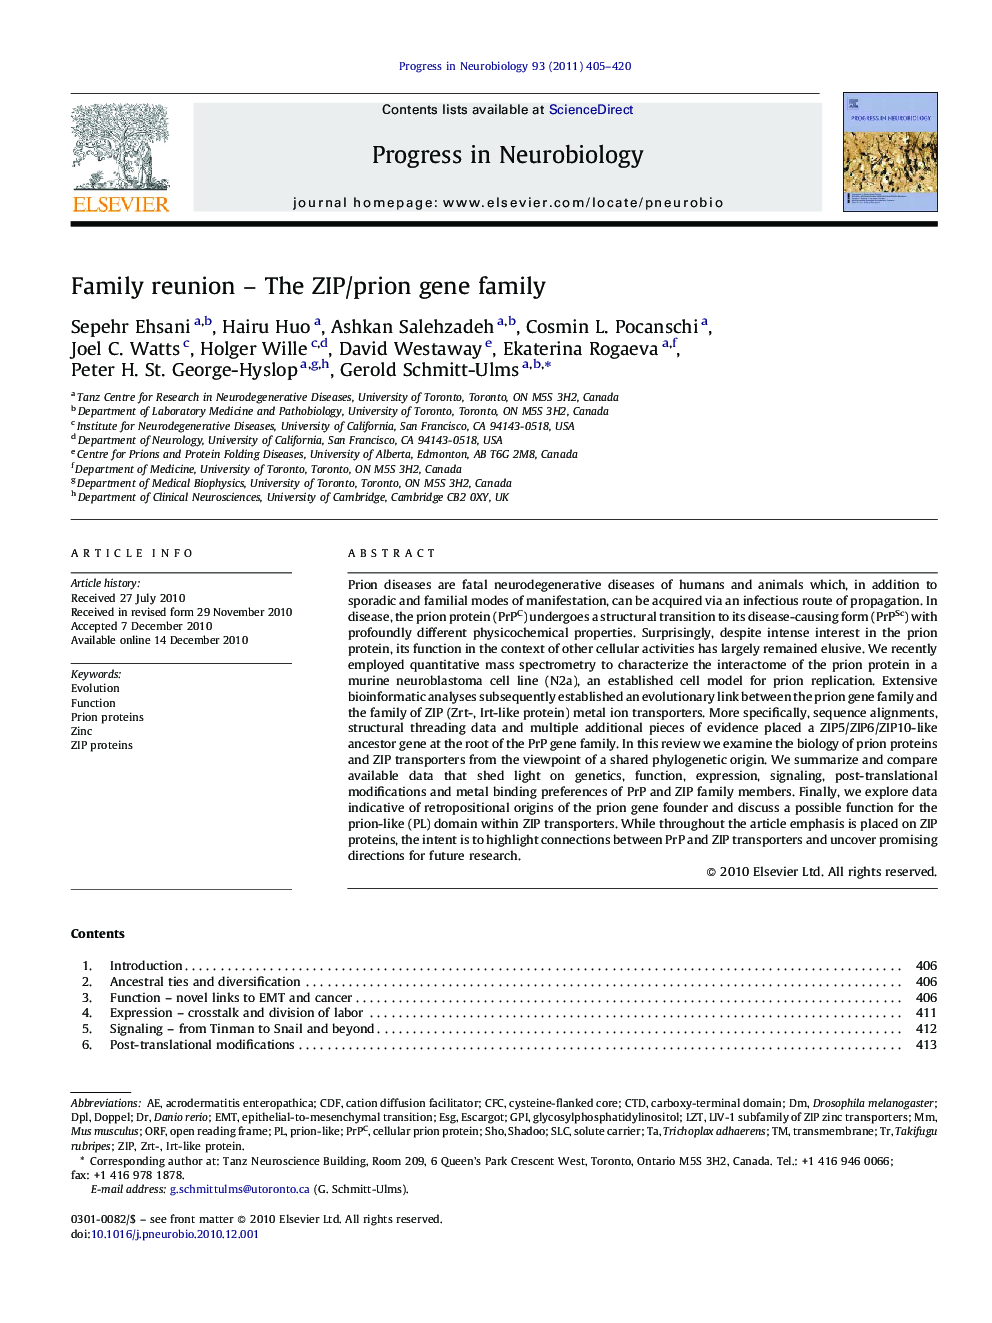 Family reunion – The ZIP/prion gene family